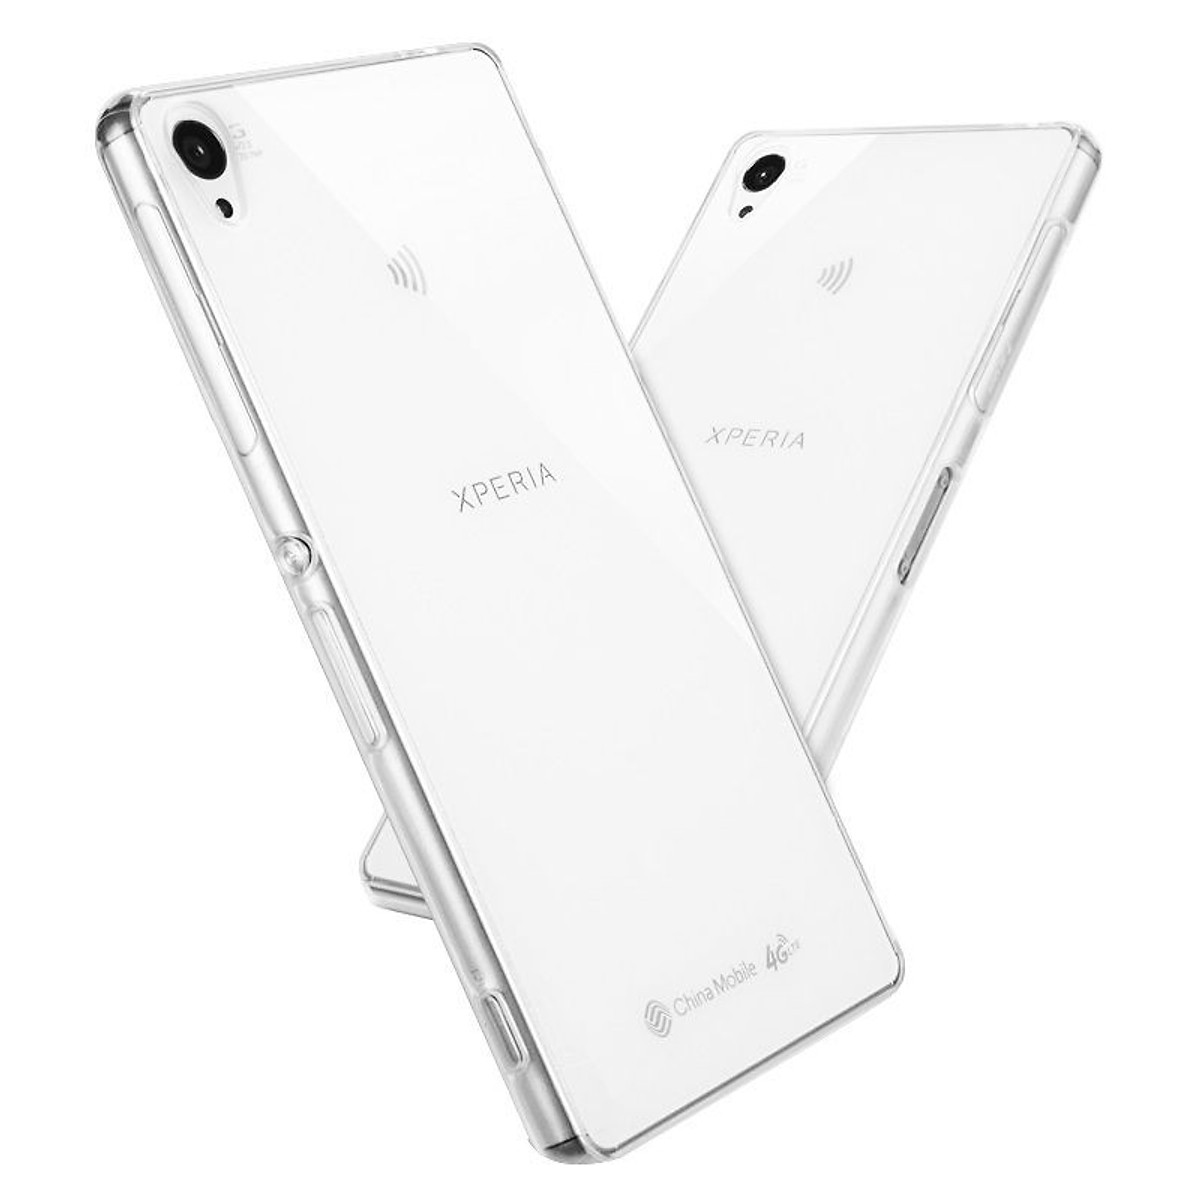 Ốp lưng dẻo silicon cho Sony Xperia Z3 Ultra Thin mỏng 0.6 mm (trong suốt)